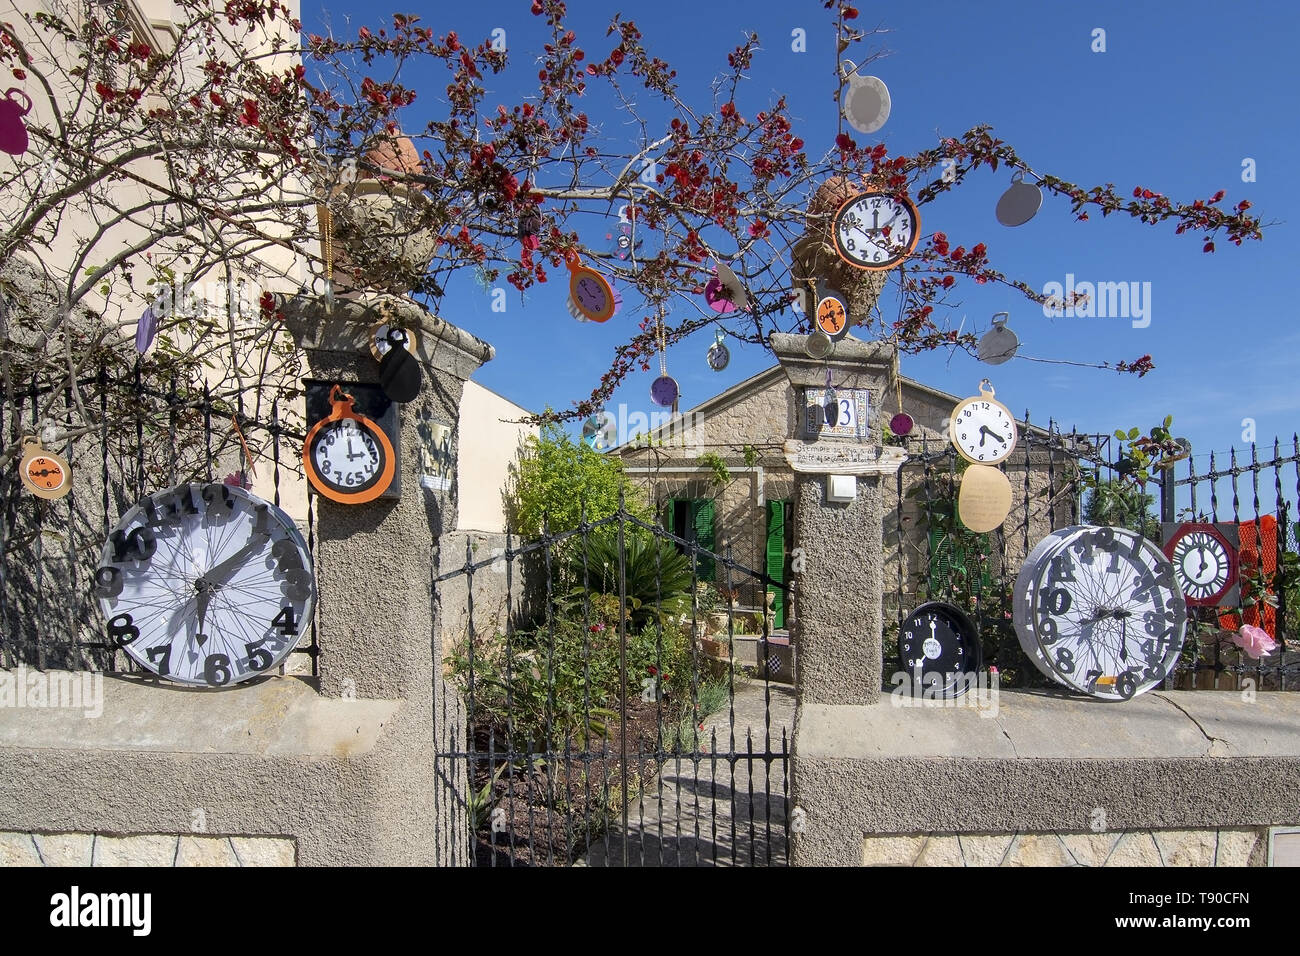 Yearly Flower festival, this time with Alice In Wonderland theme on a sunny day of spring on May 1, 2019 in Costitx, Mallorca Stock Photo